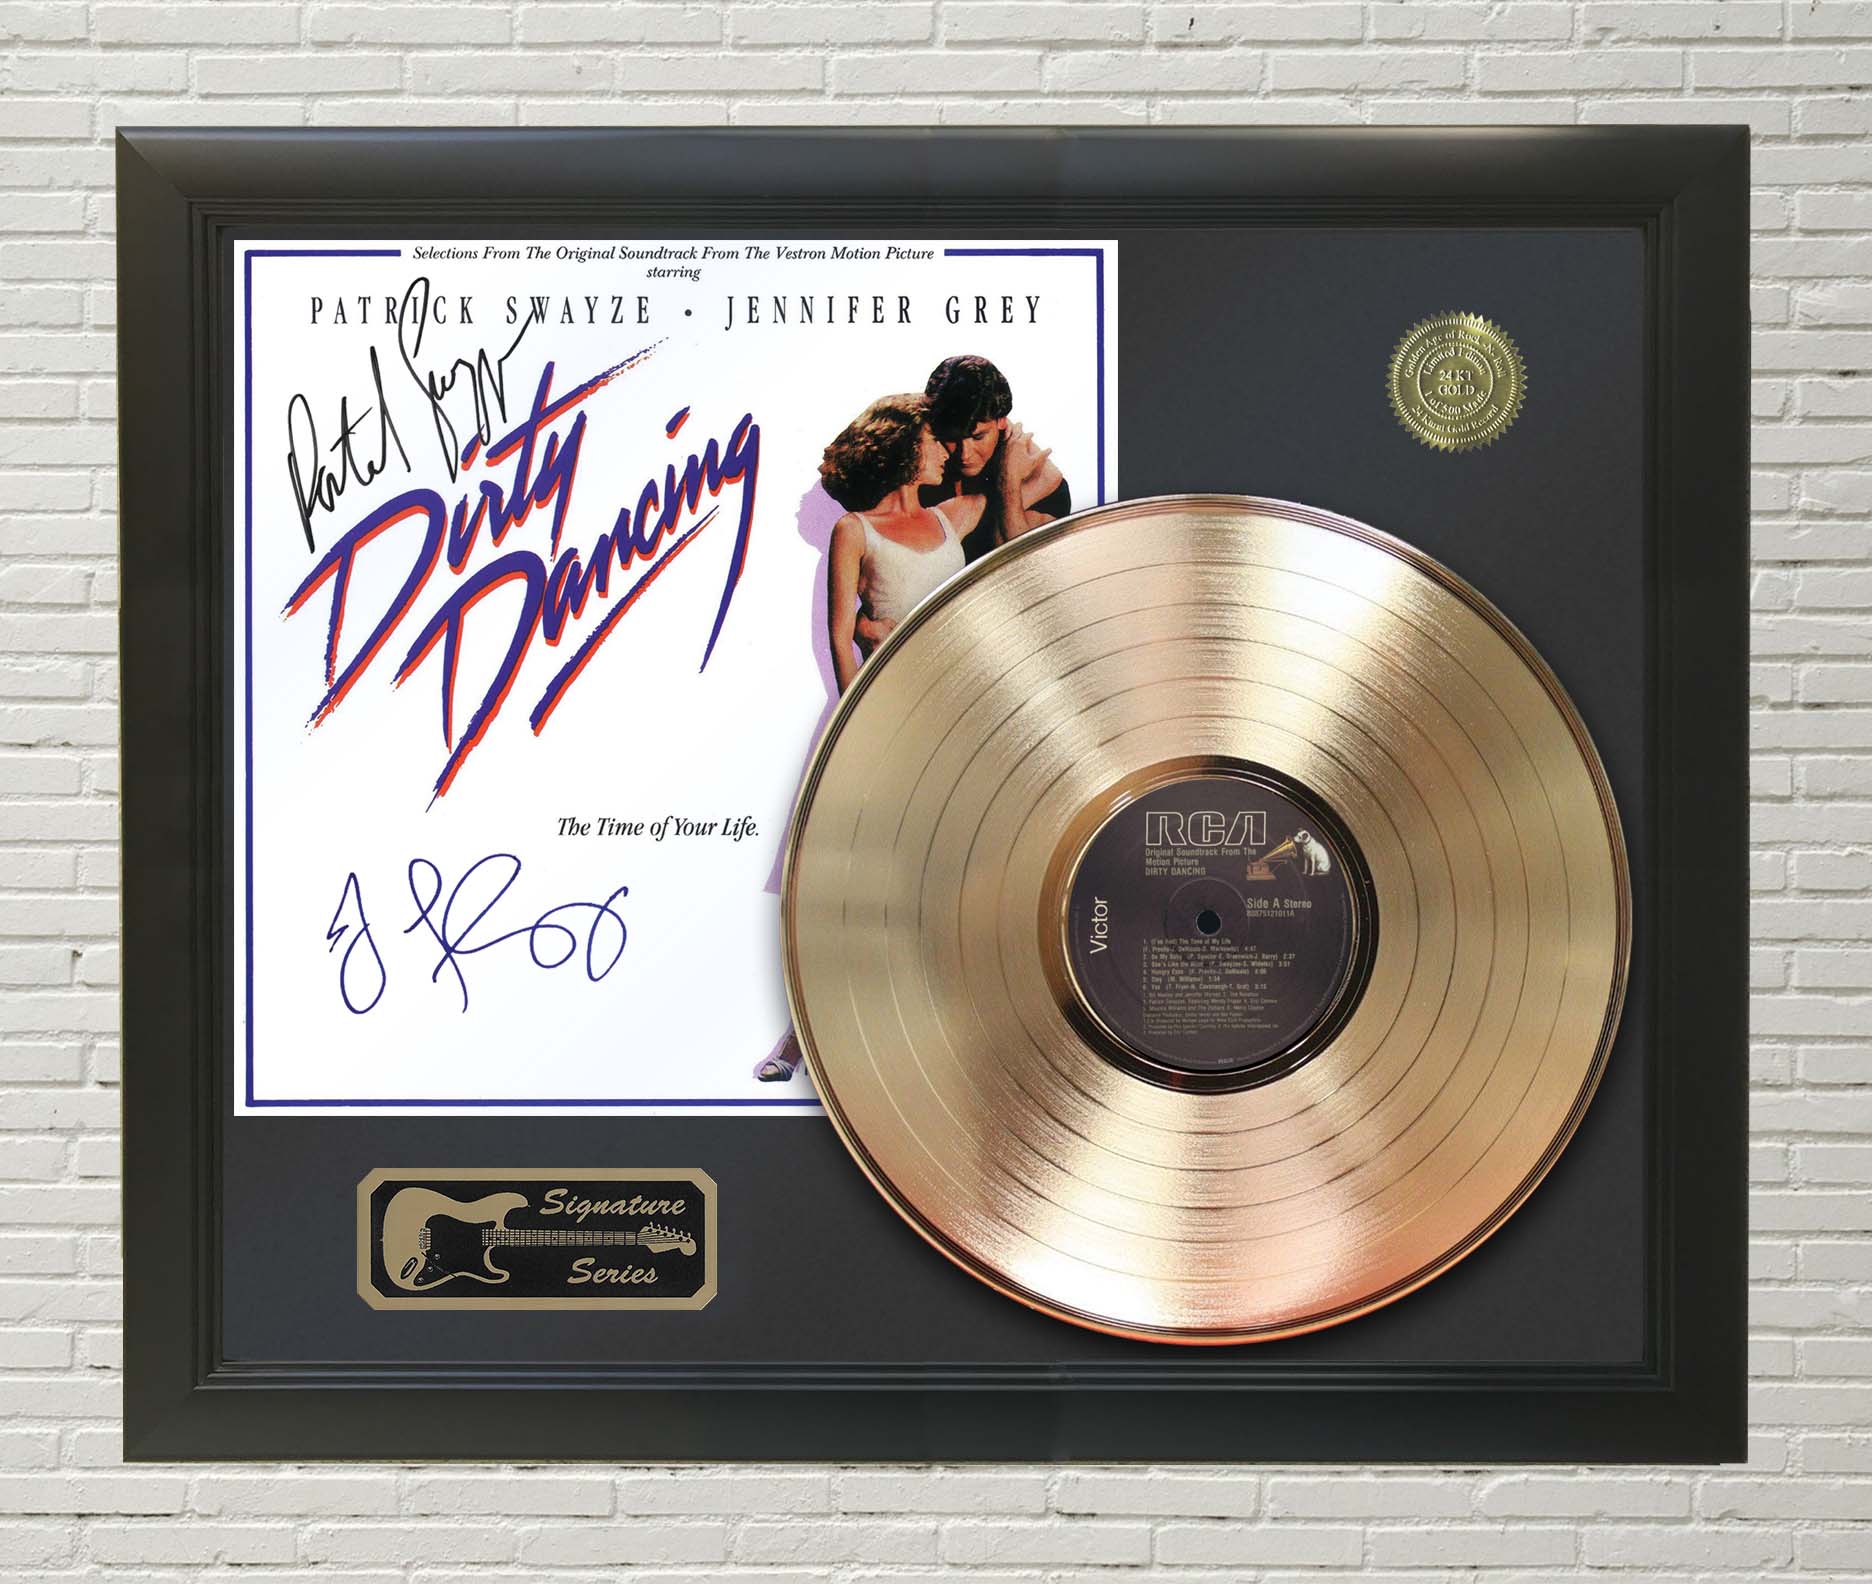 Bugsering kompression race Dirty Dancing Soundtrack Framed Signature Gold LP Record Display M4 - Gold  Record Outlet Album and Disc Collectible Memorabilia